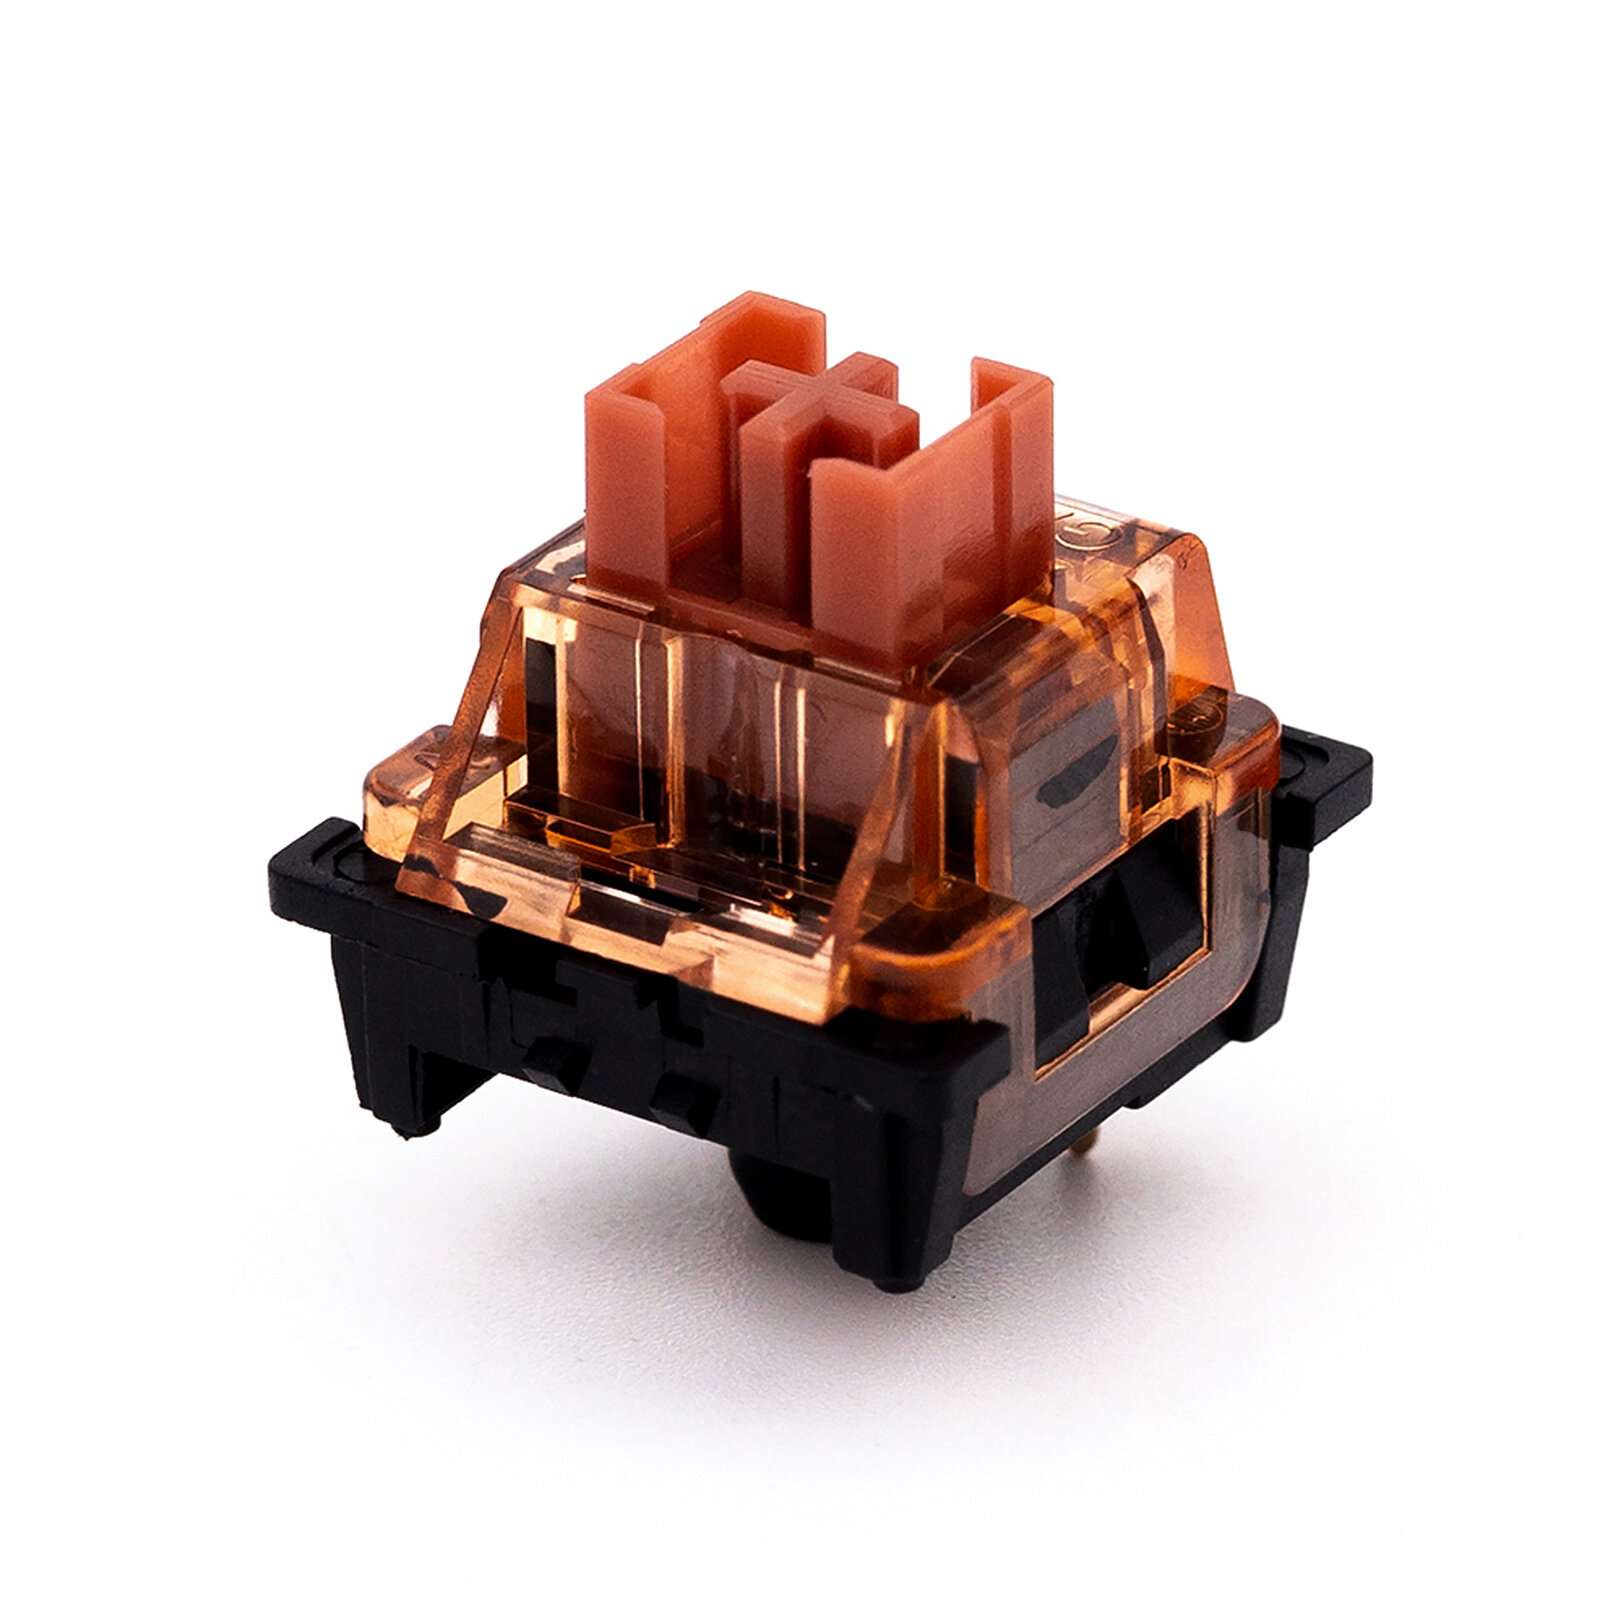 

35Pcs GAMAKAY Griffin Mechanical Switch 3-Pin Prelubricate Paragraph Switch for DIY Mechanical Gaming Keyboard